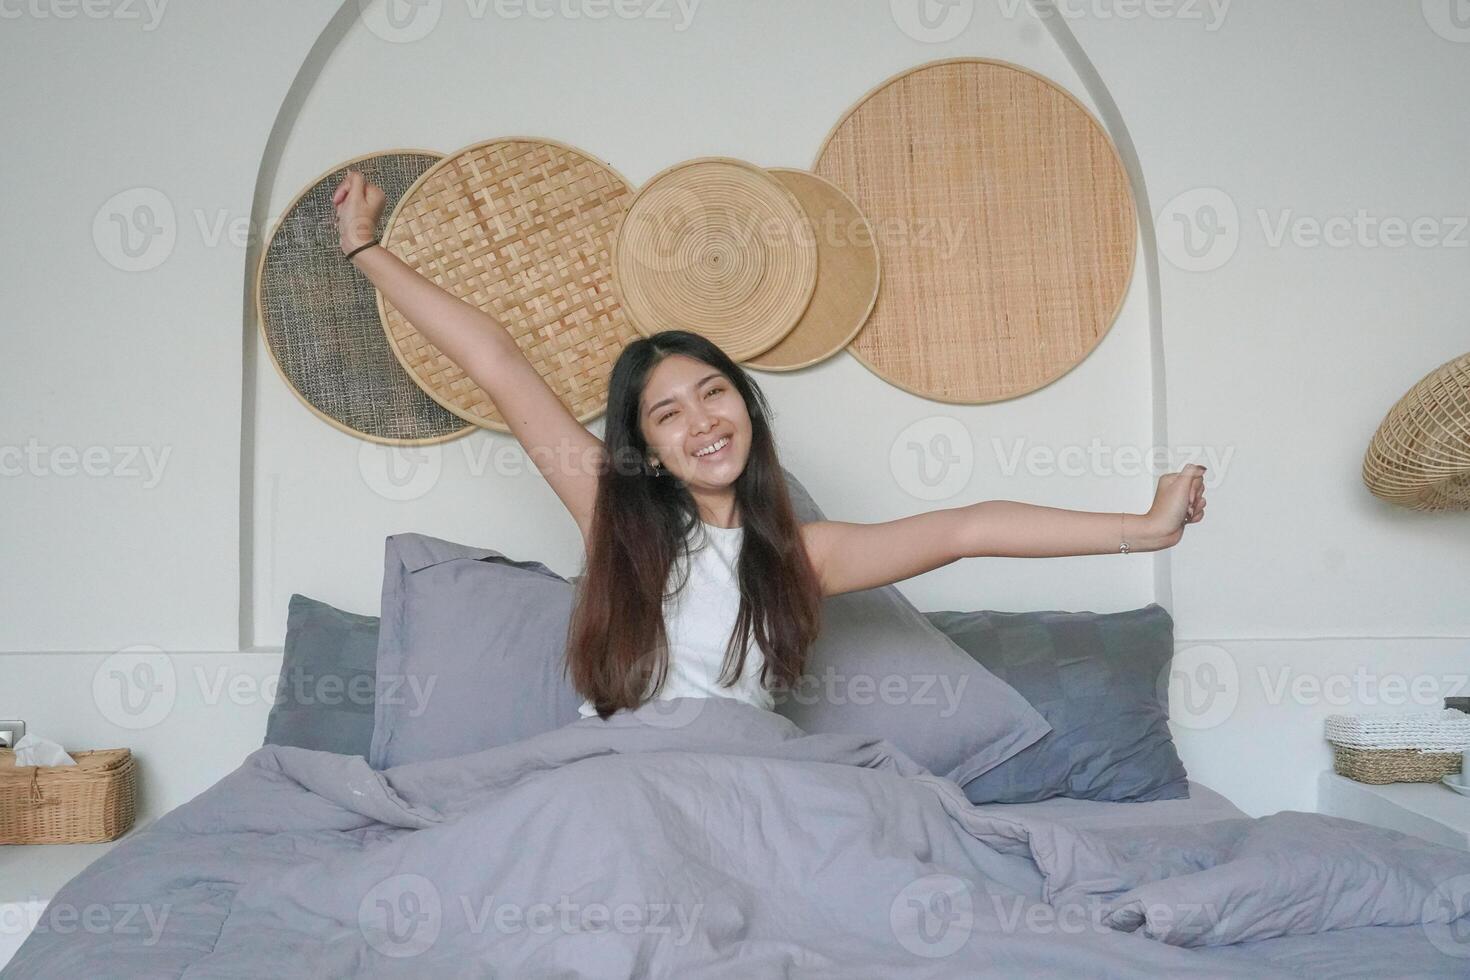 Beautiful Asian woman waking up from sleep lying on bed in bedroom, stretching hands and smiling happily photo